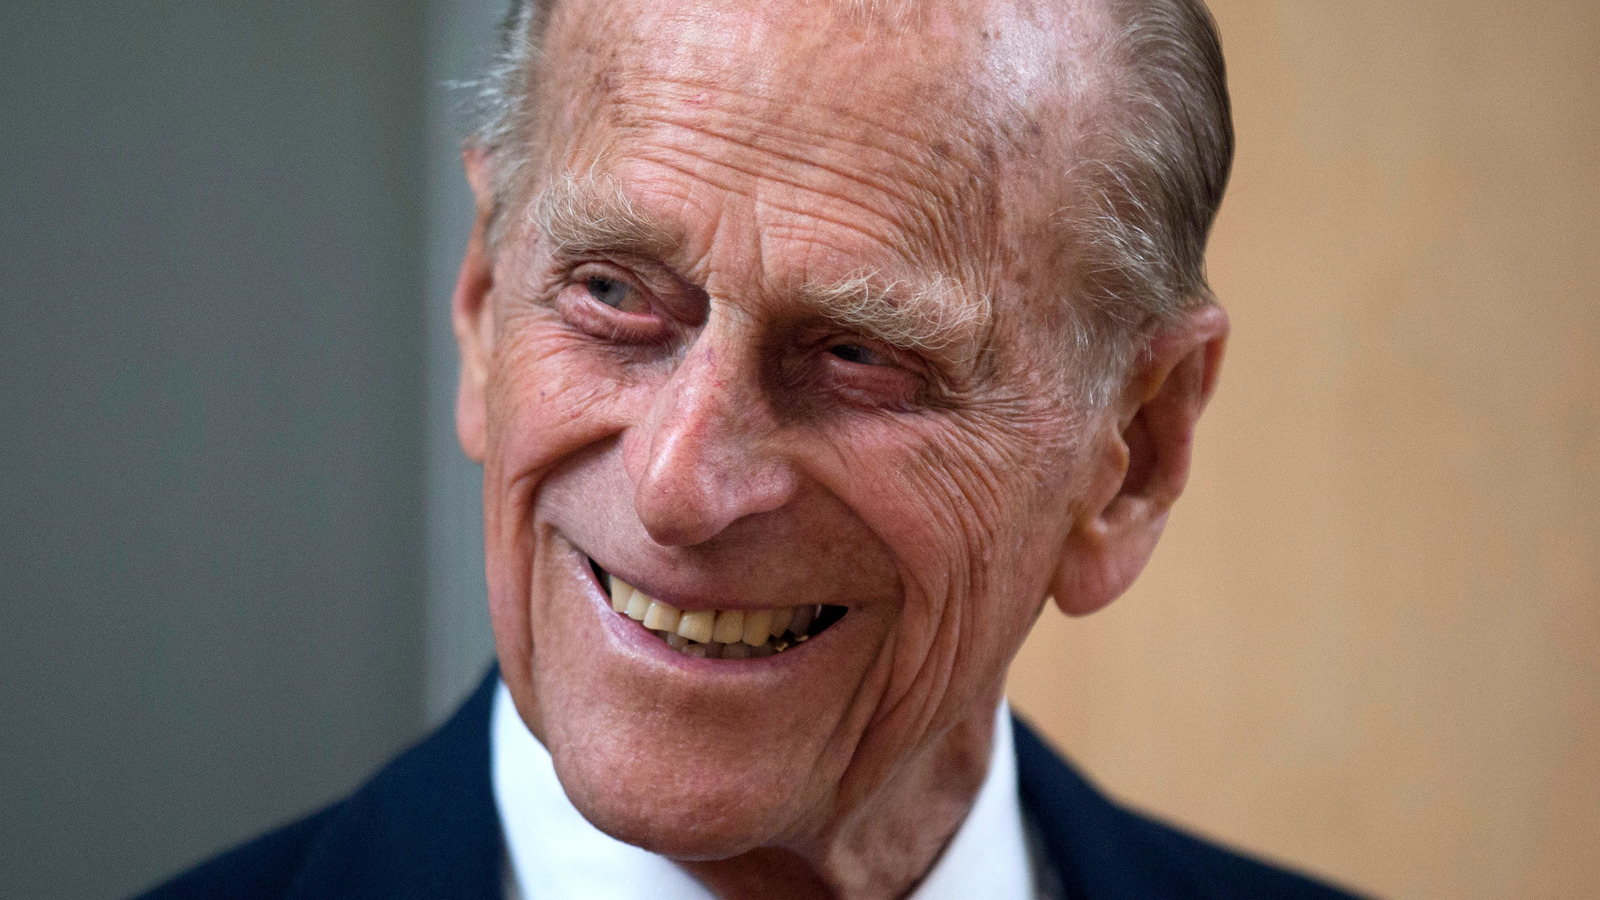 Why Isn't Prince Philip King? How Philip Became a British Prince